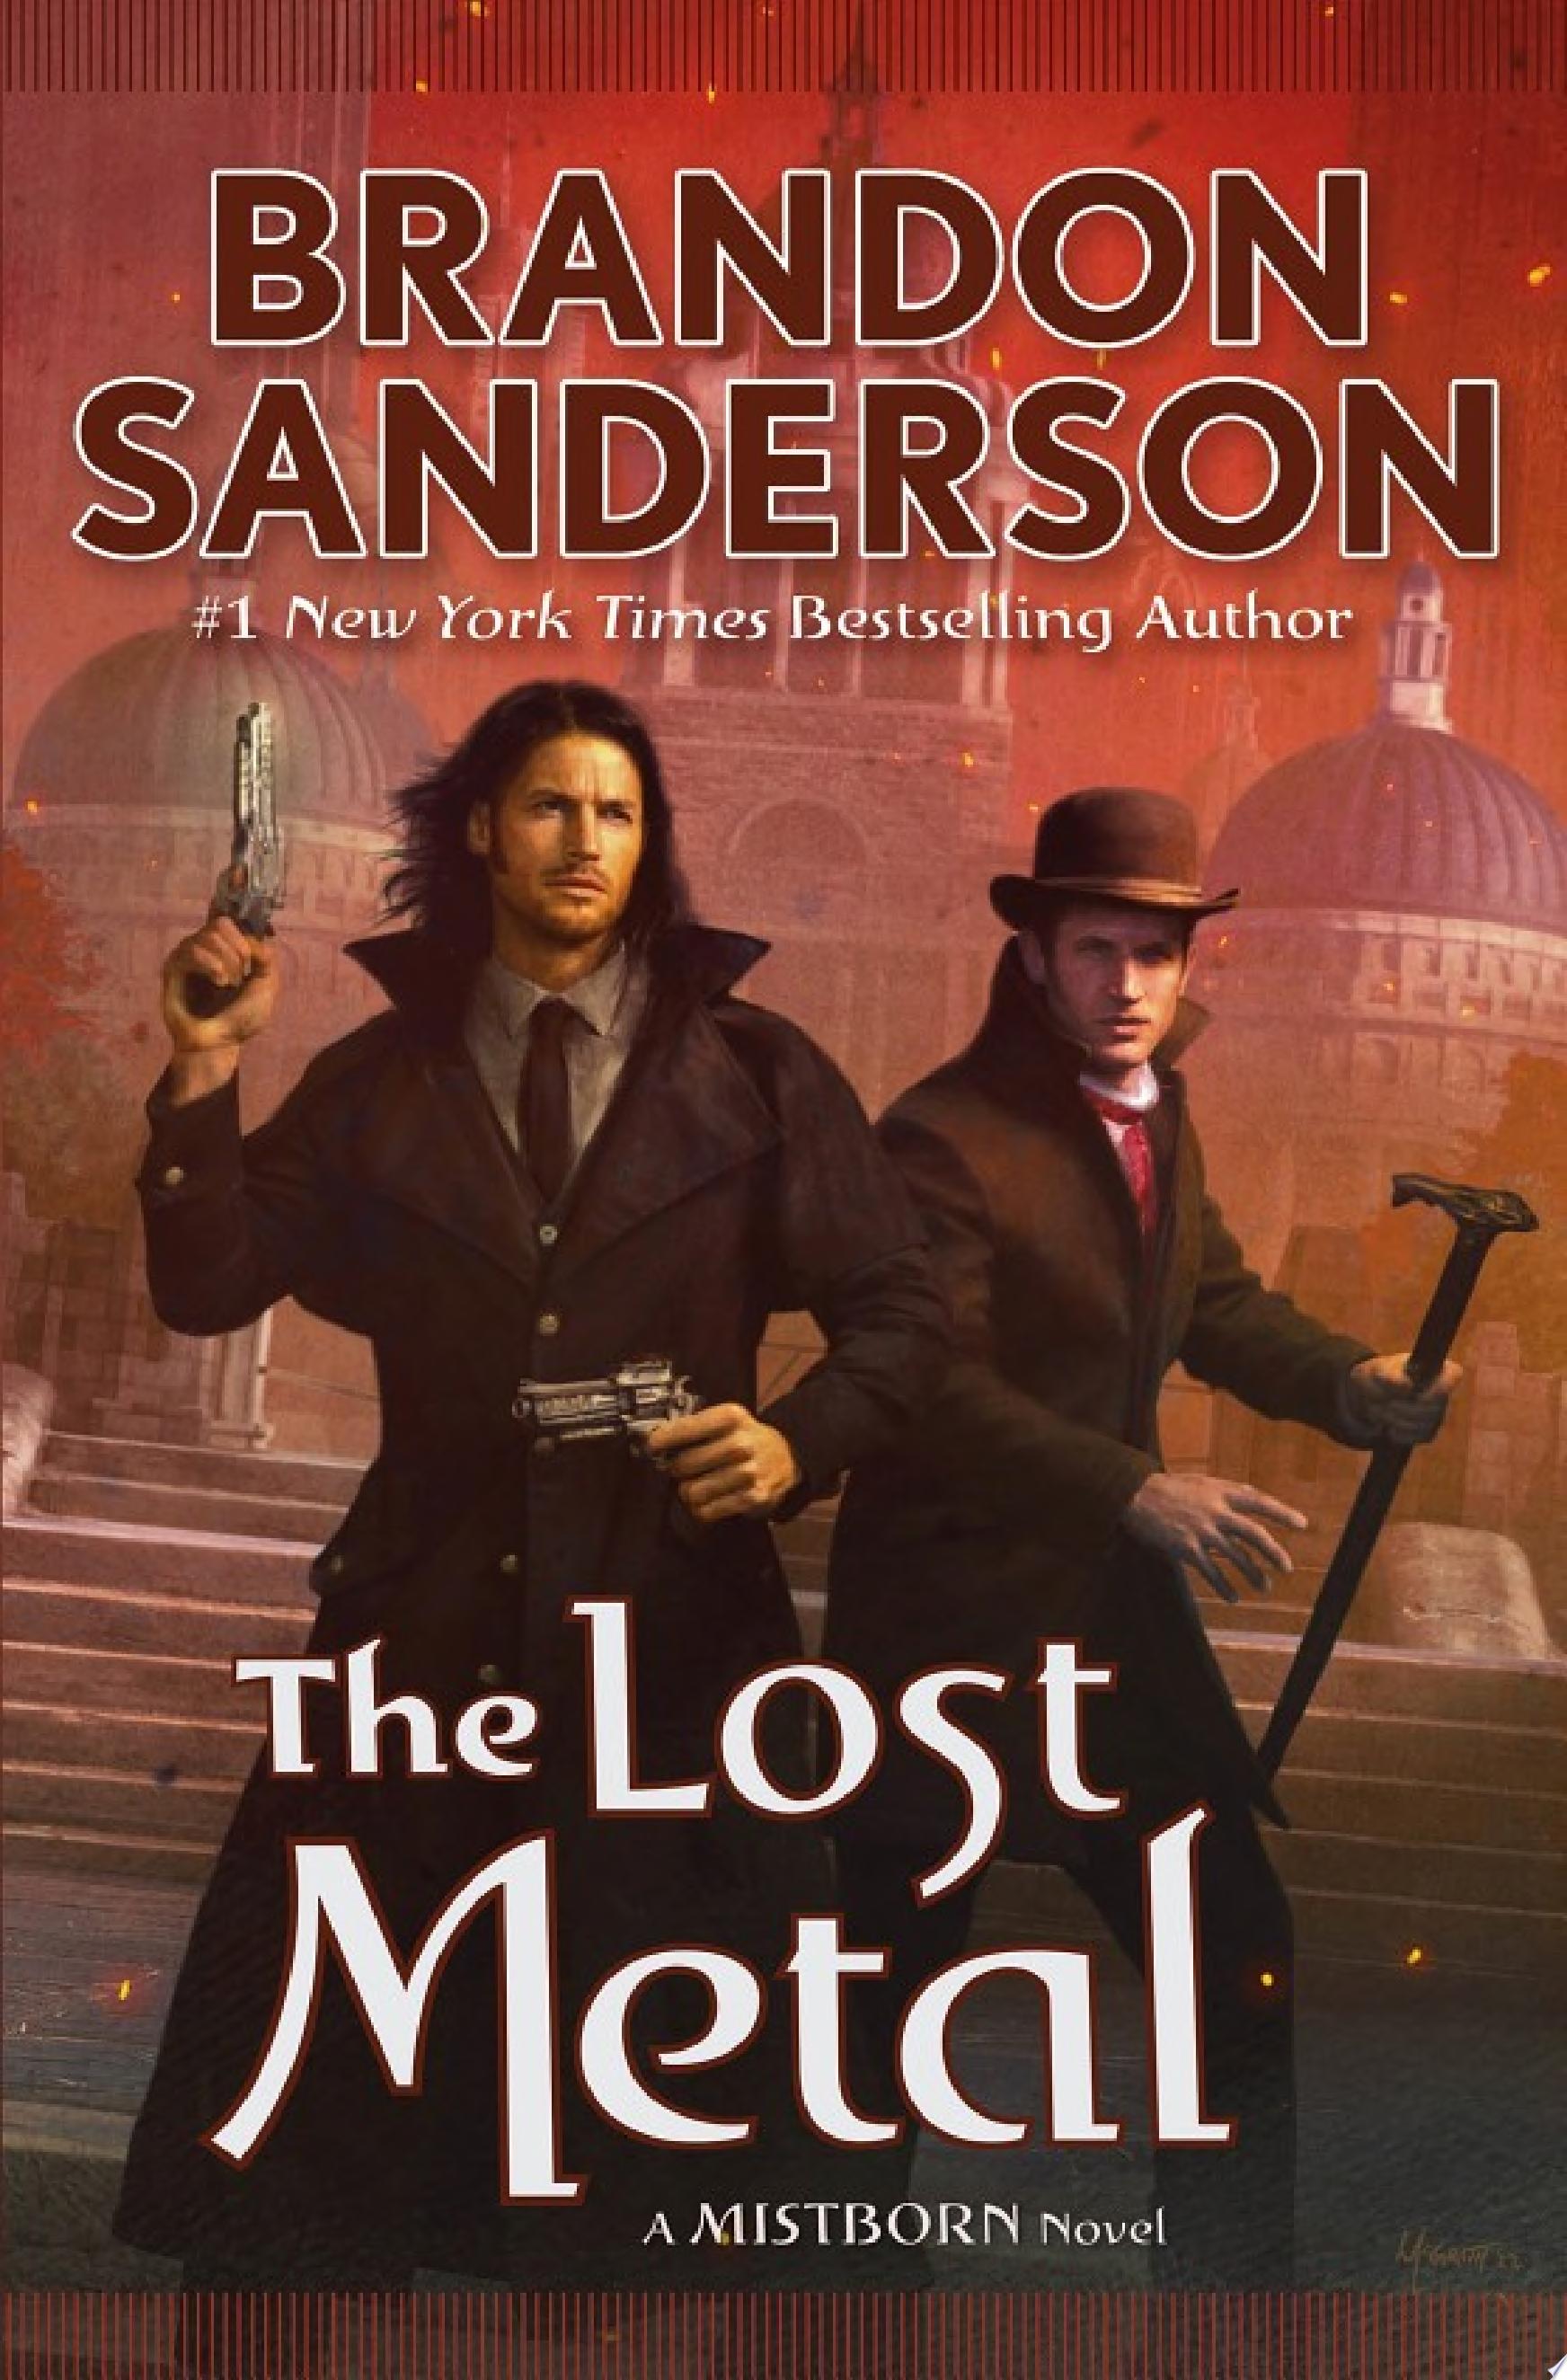 Guide to the Mistborn Books by Brandon Sanderson - Ink and Imaginings